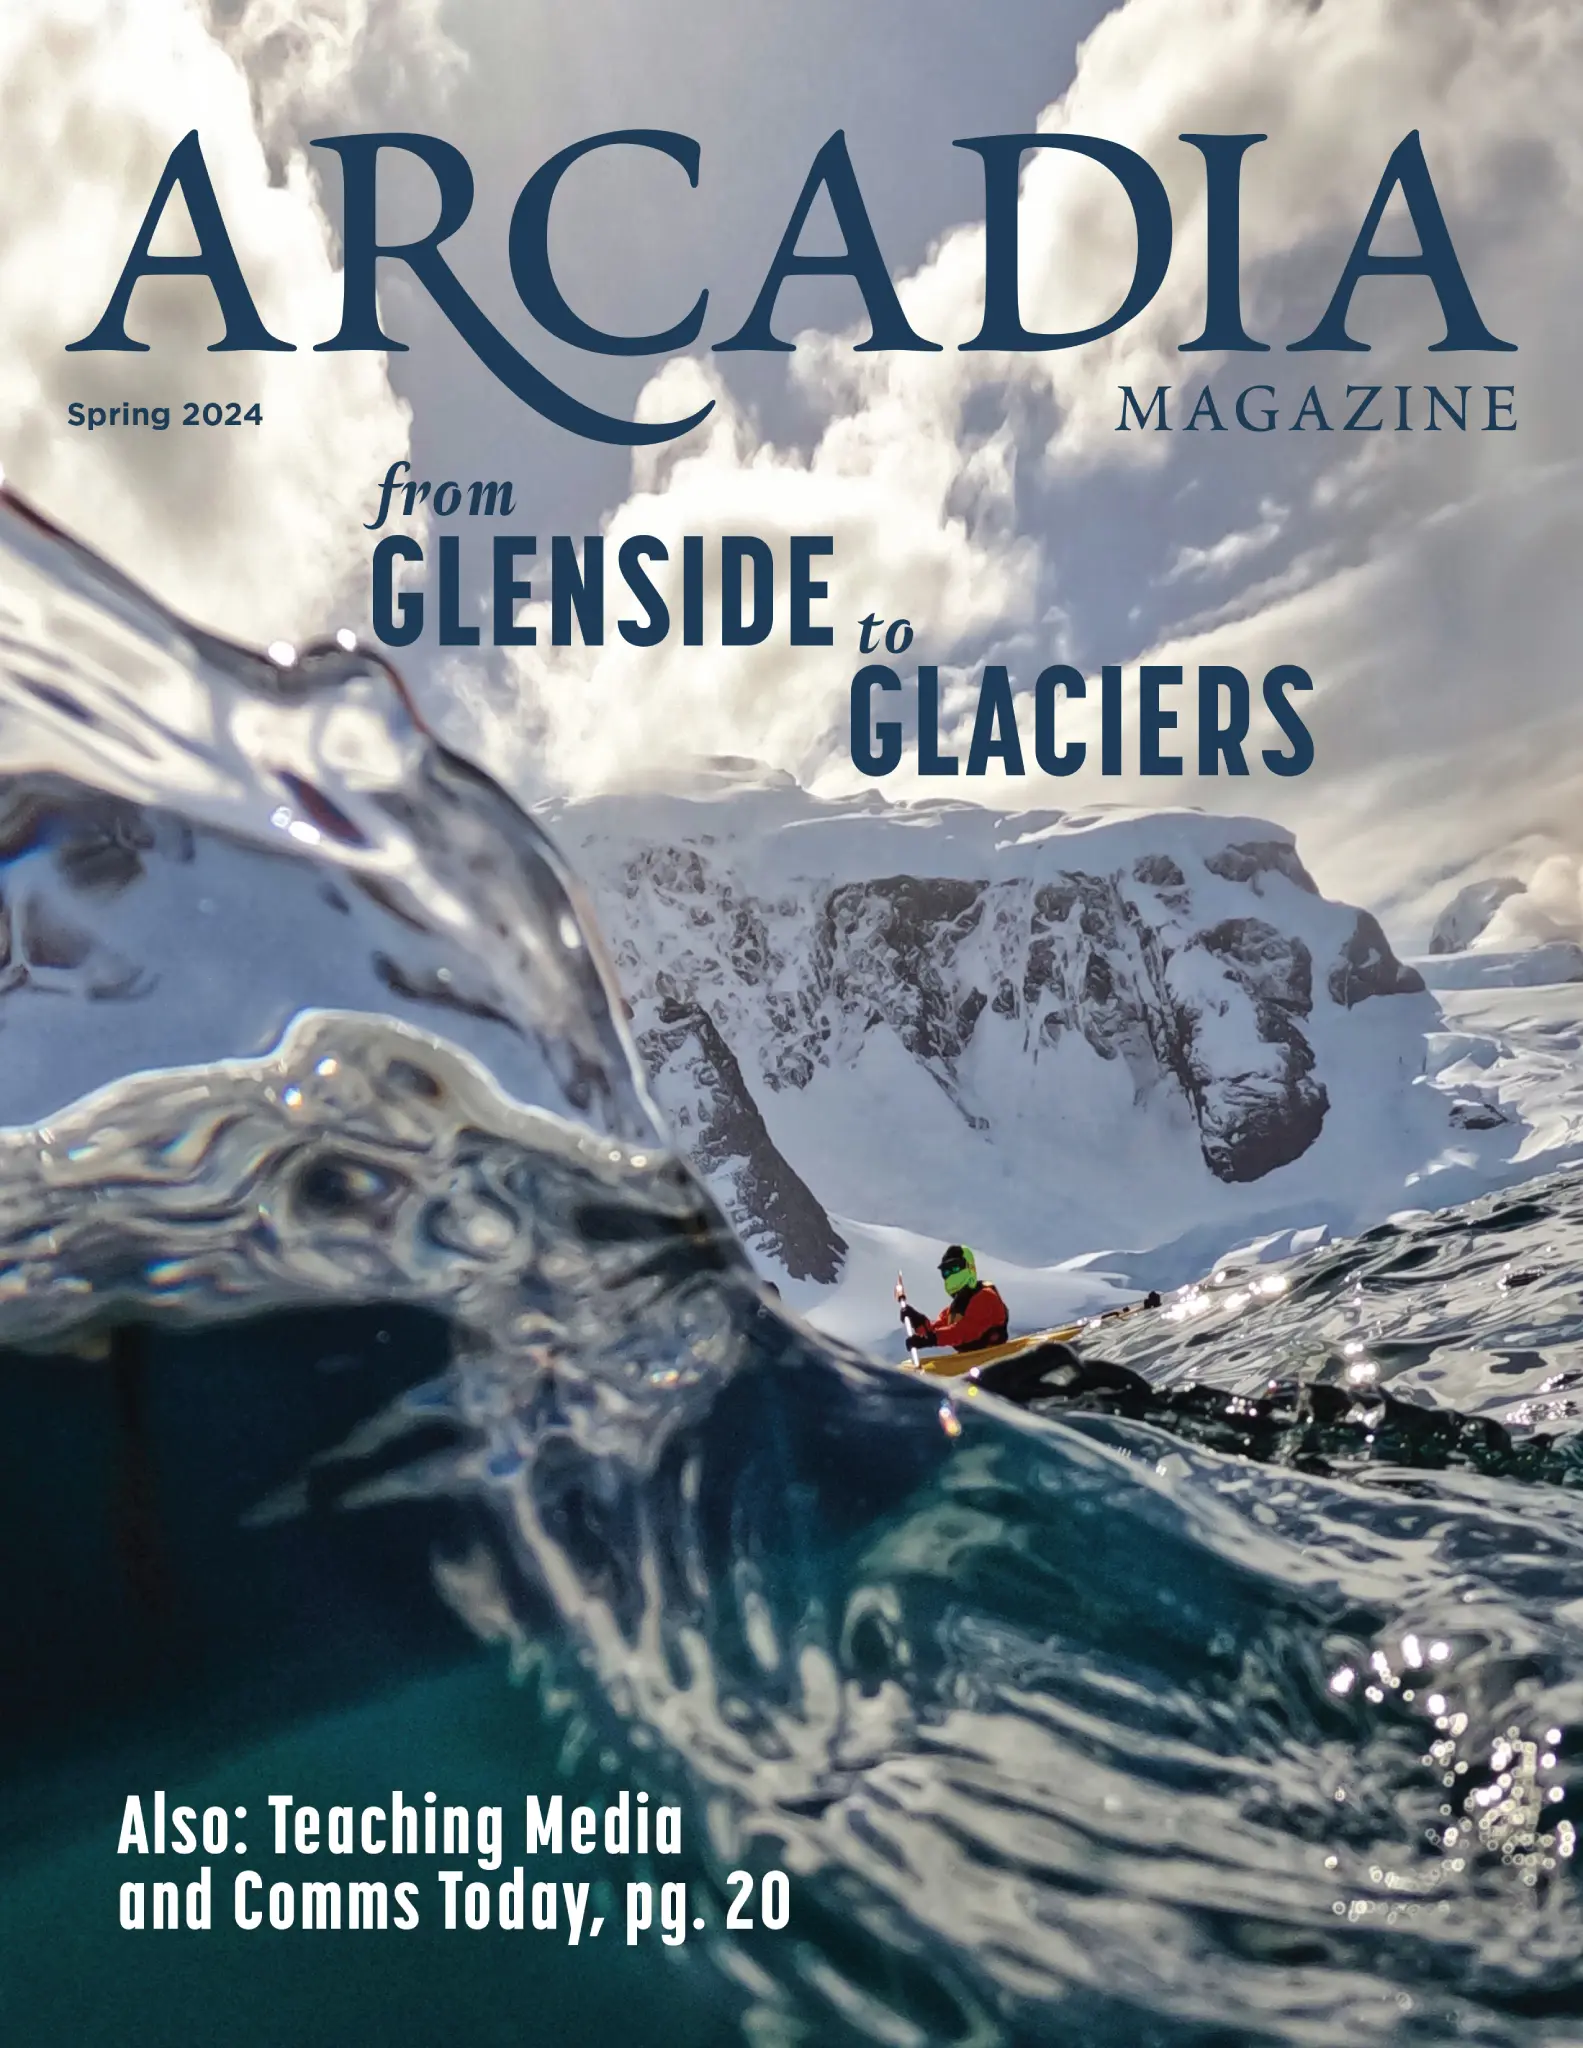 The cover of the Spring 2024 edition of Arcadia Magazine.